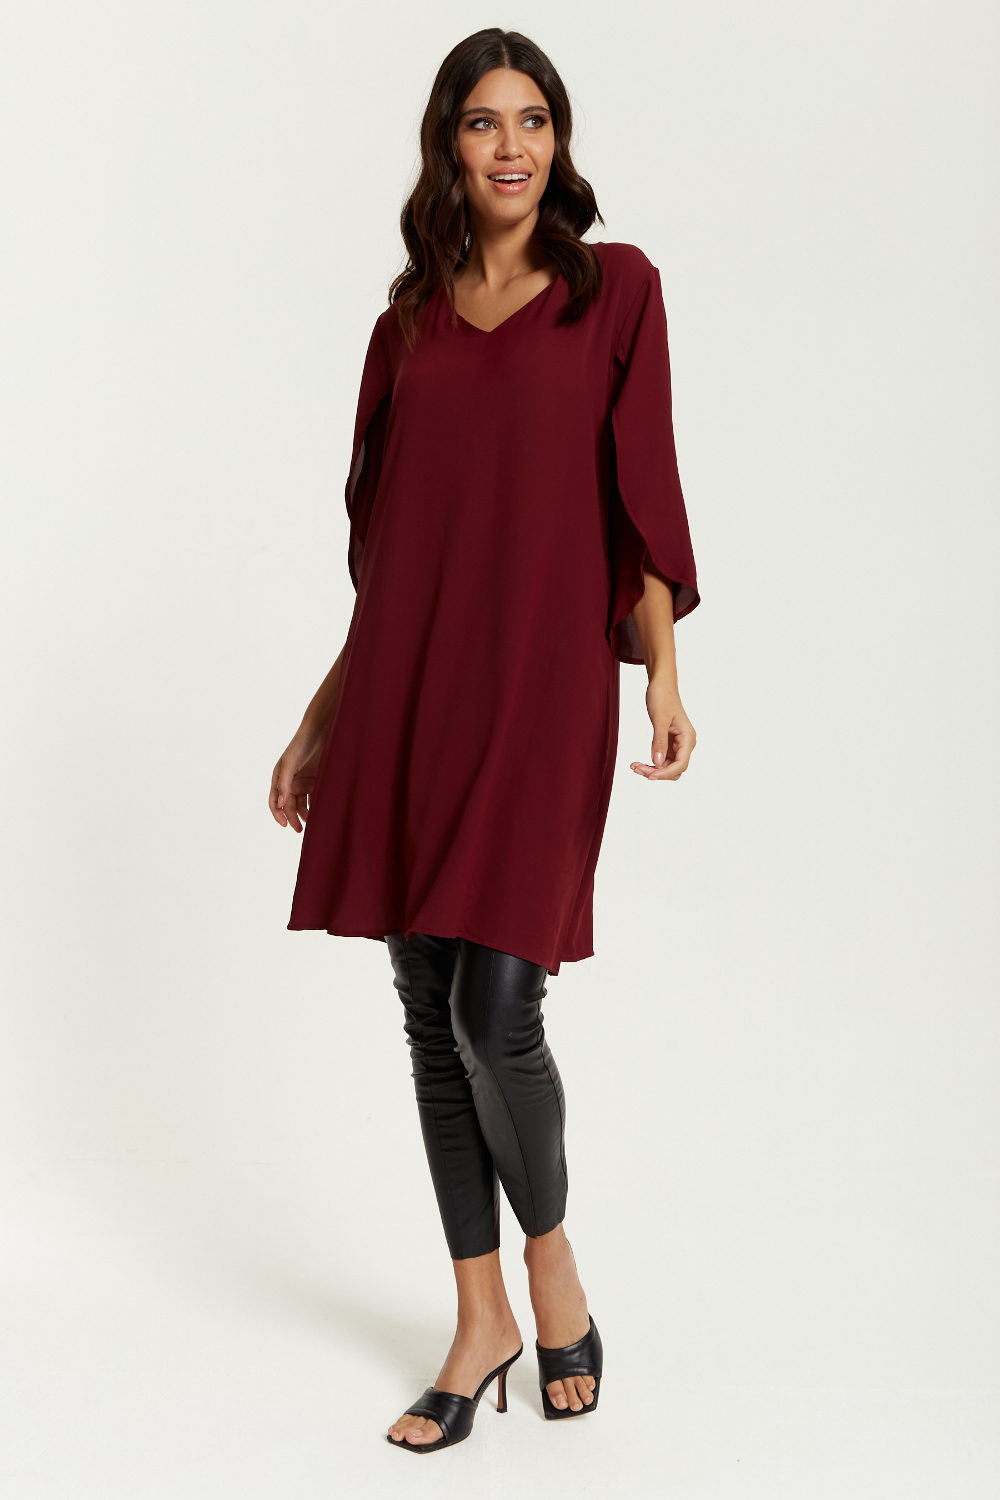 Oversized V Neck Tunic with Split Sleeves in Burgundy GLR FASHION NETWORKING